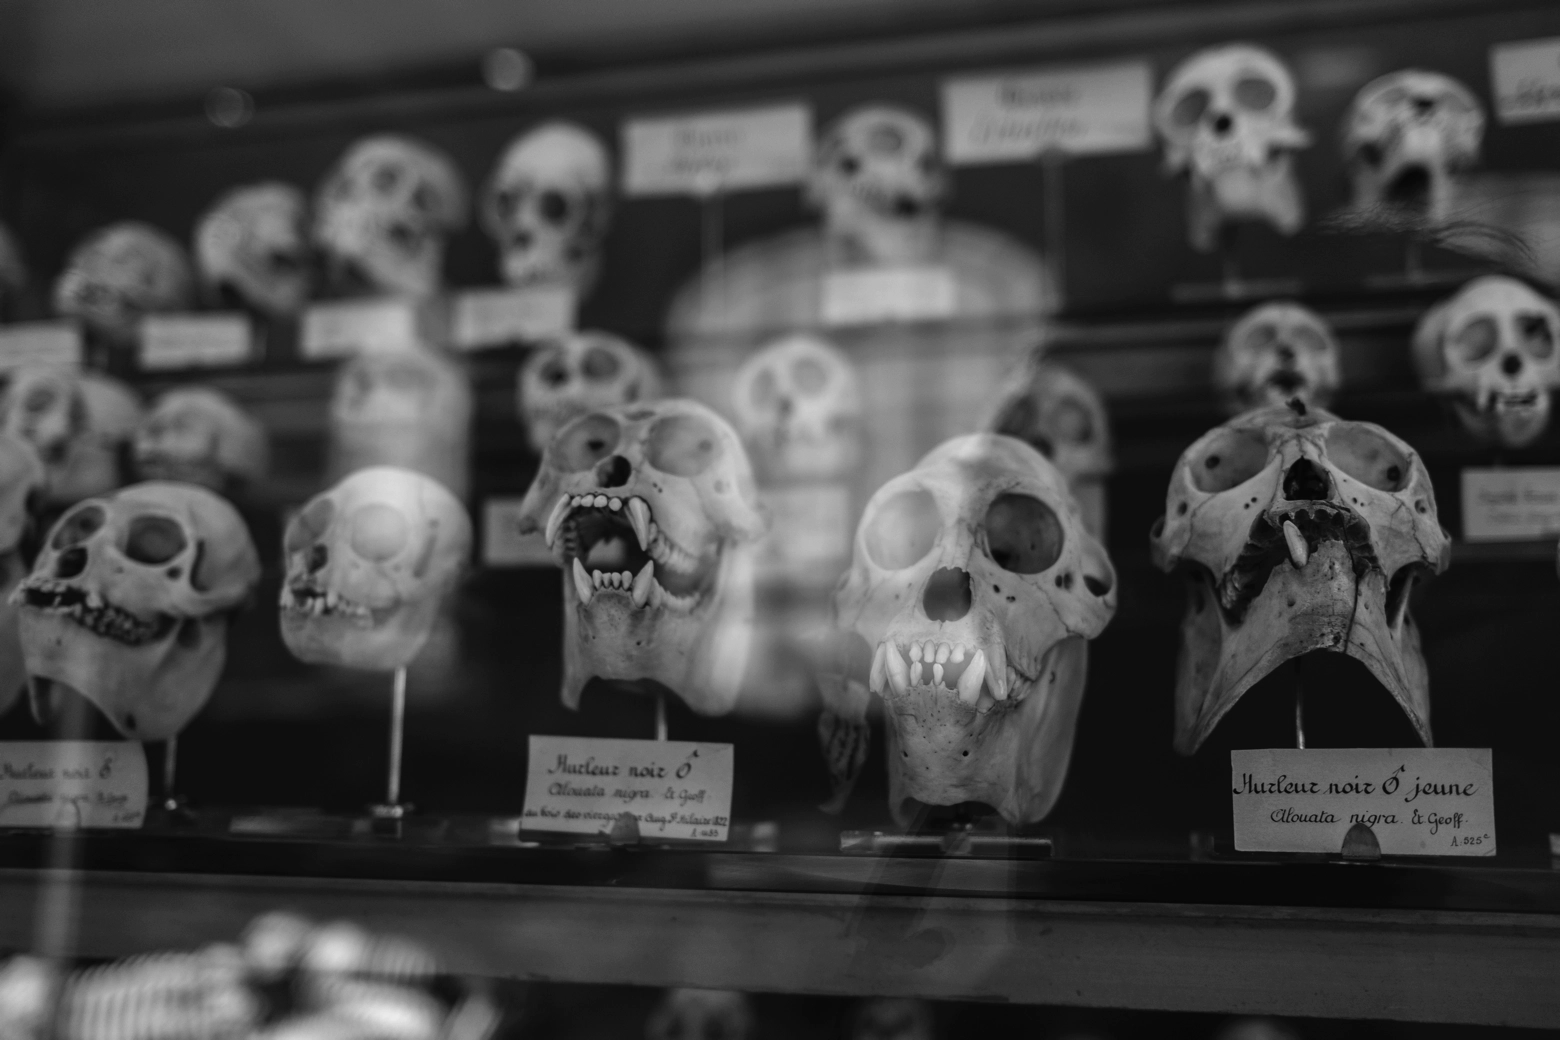 Human, monkey, chimpanzee, and ape skulls in a row with small placards written in French nearby.